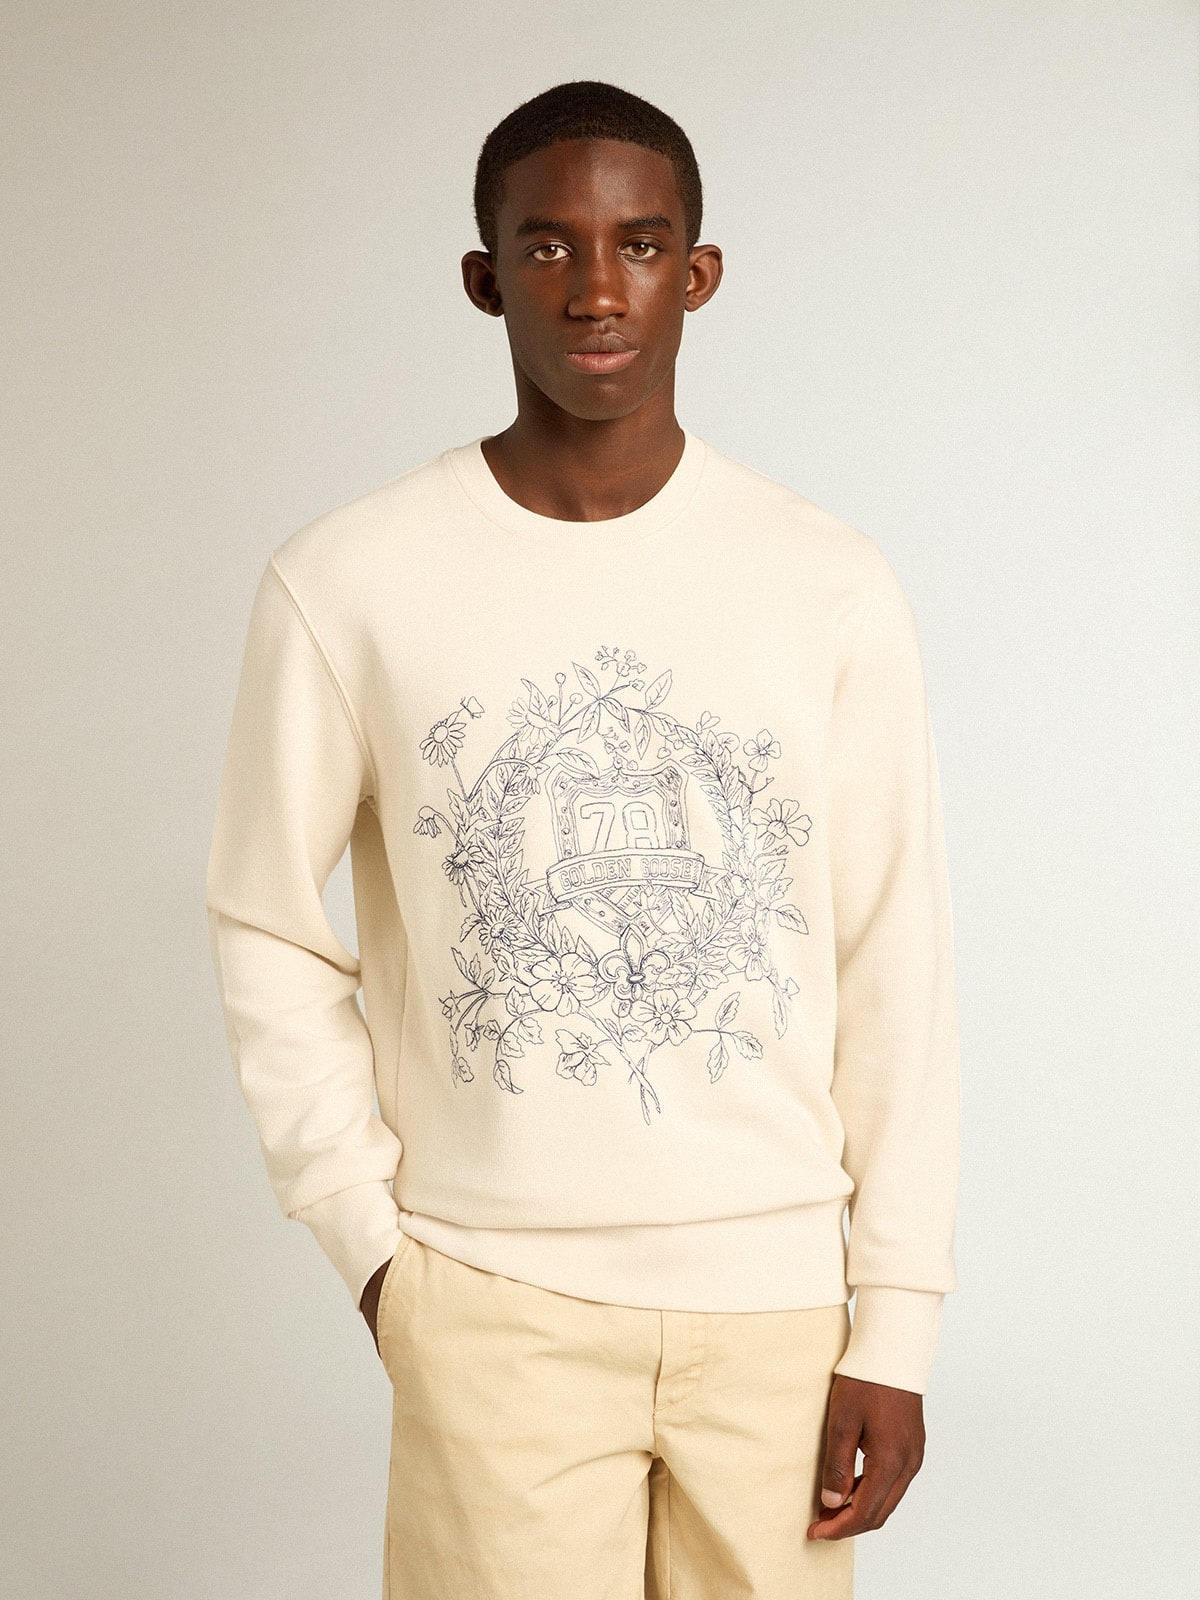 Men's aged white cotton sweatshirt with embroidery on the front - 5